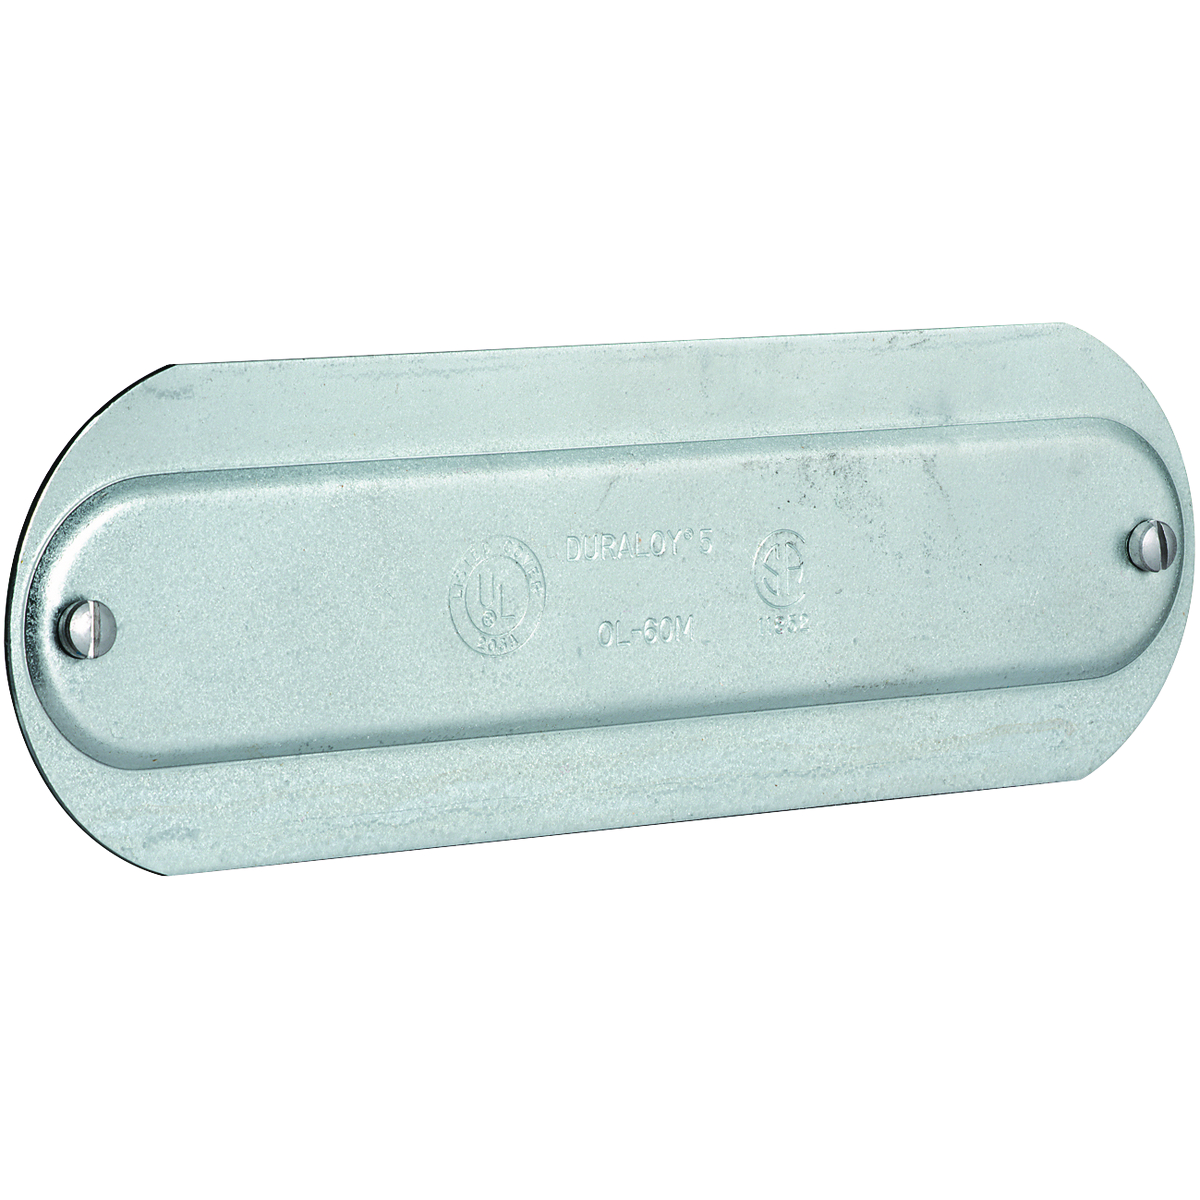 O SERIES/DURALOY 5 SERIES - ALUMINUM CONDUIT BODY COVER - HUB SIZE 1/2INCH